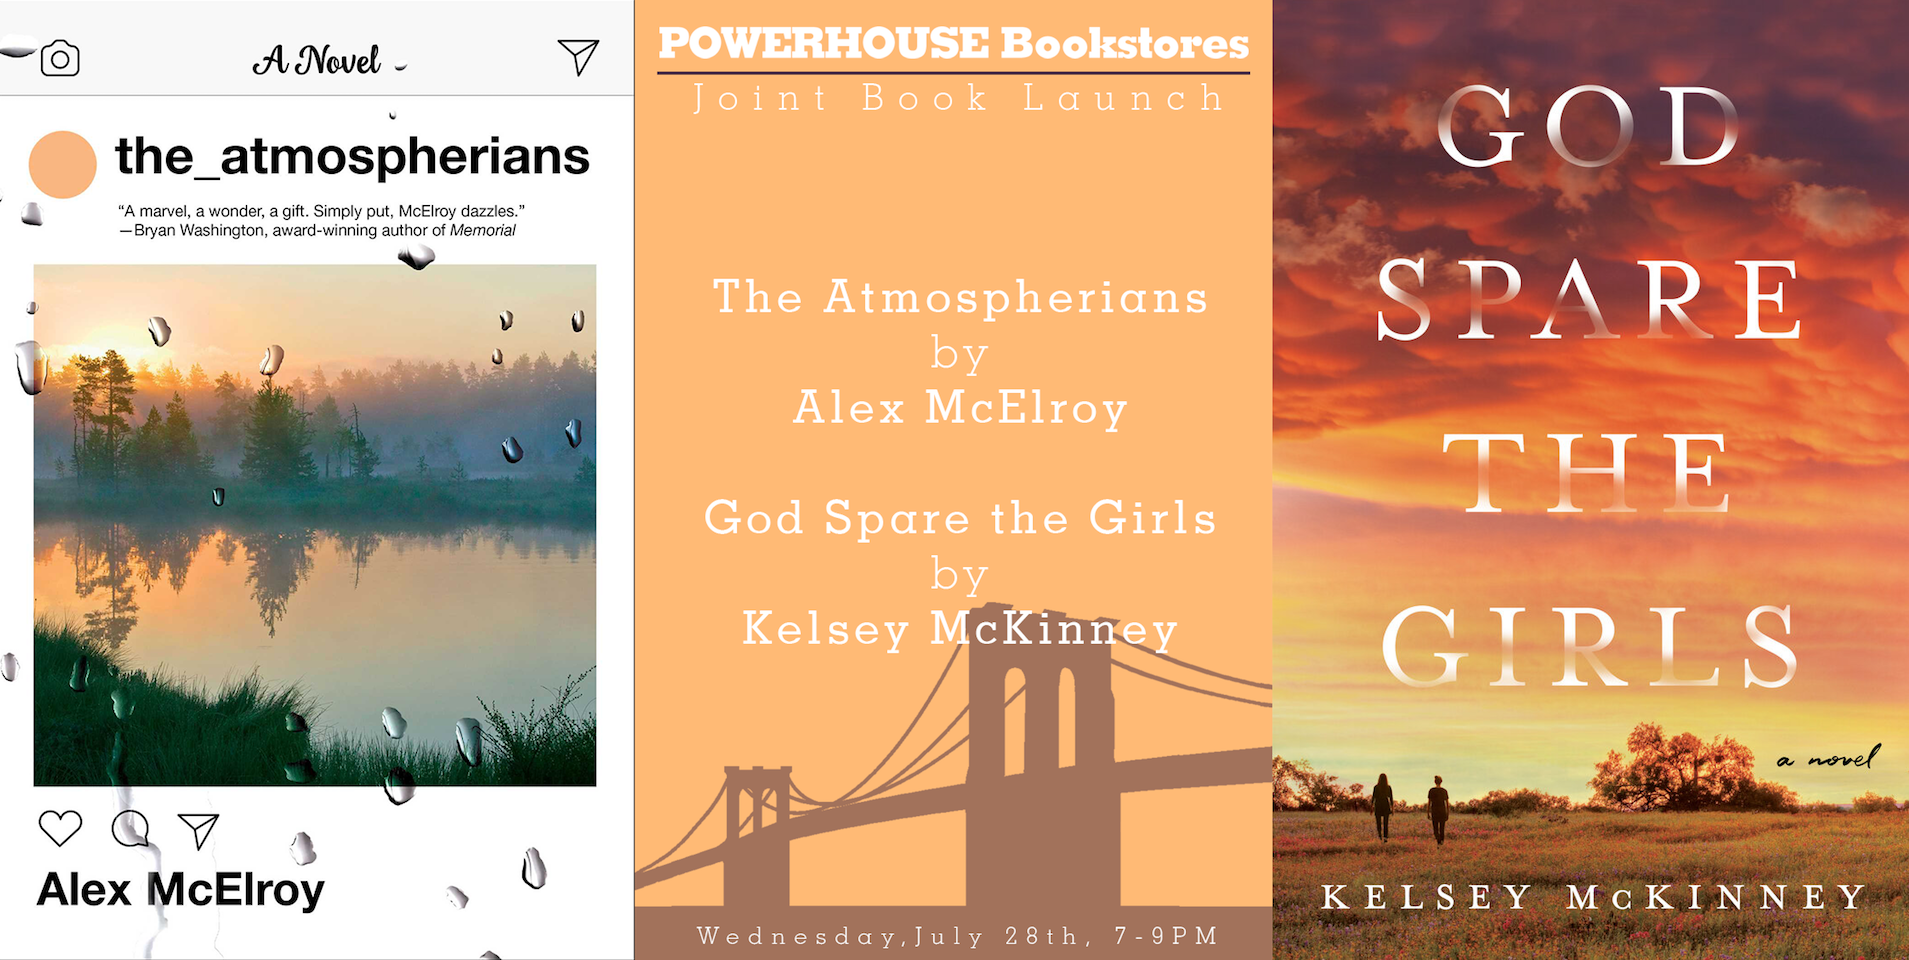 Joint Book Launch: The Atmospherians by Alex McElroy and God Spare the Girls by Kelsey McKinney